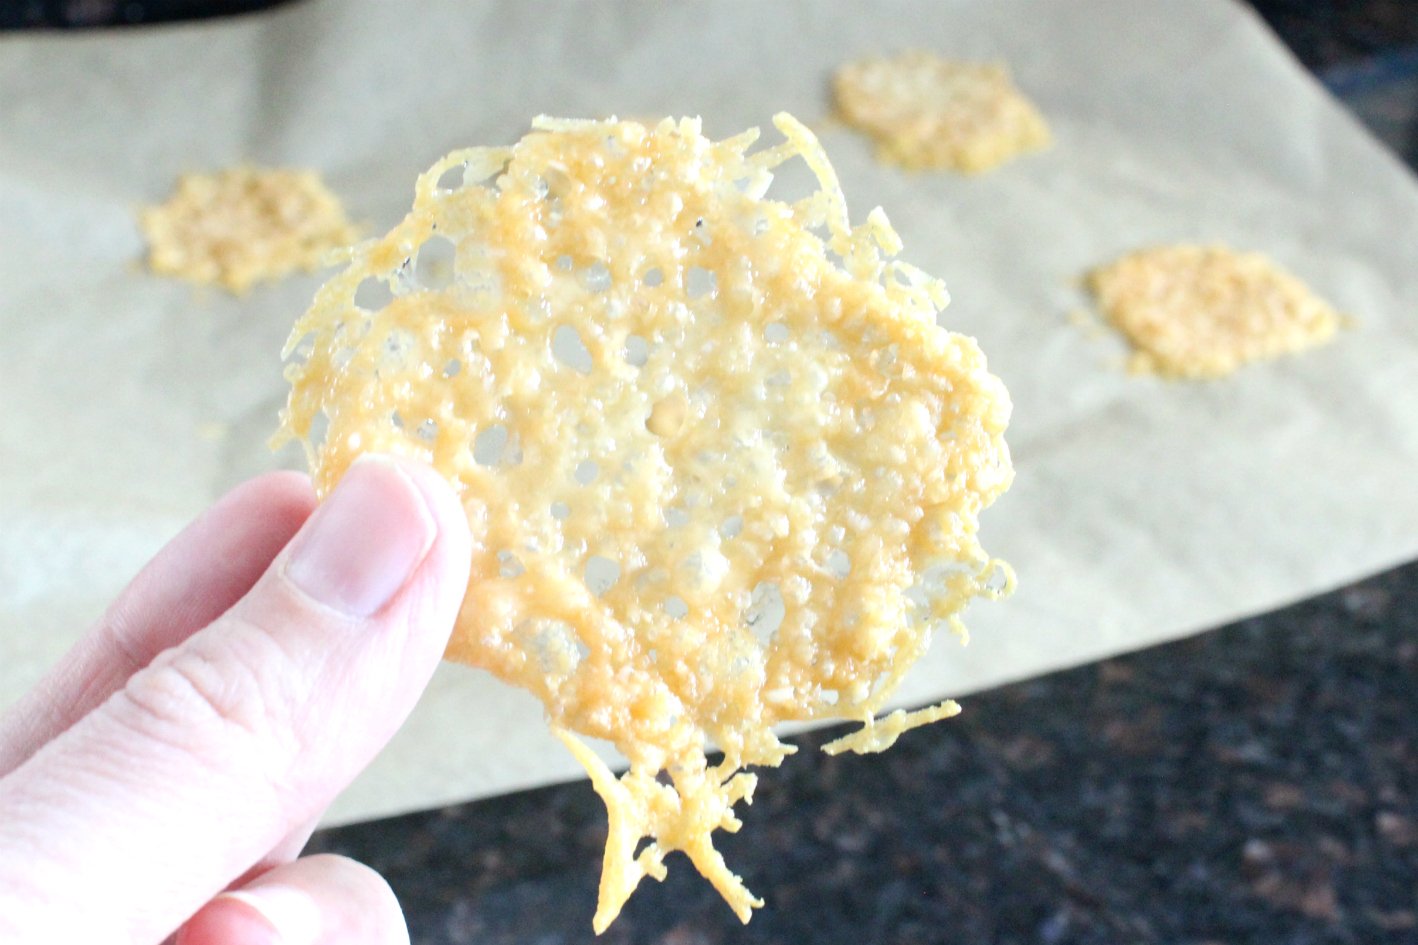 Easy Baked Parmesan Cheese Crisps (Keto, GAPS, Low Carb) ⋆ Health, Home ...